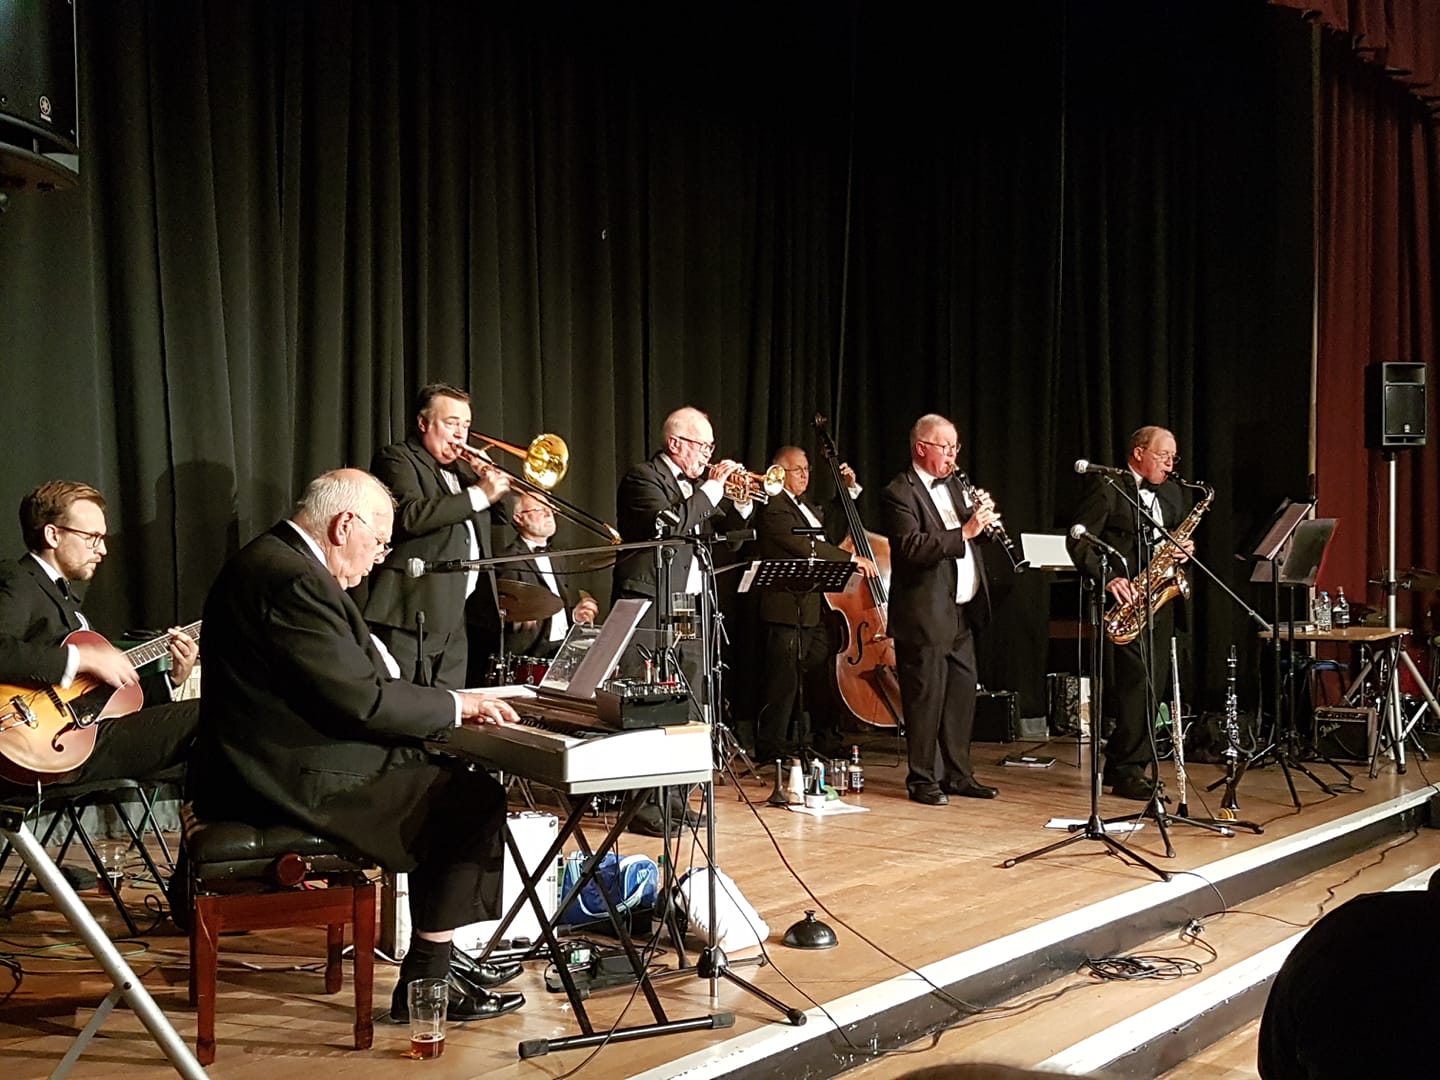 The Apex Jazz Band October 2019